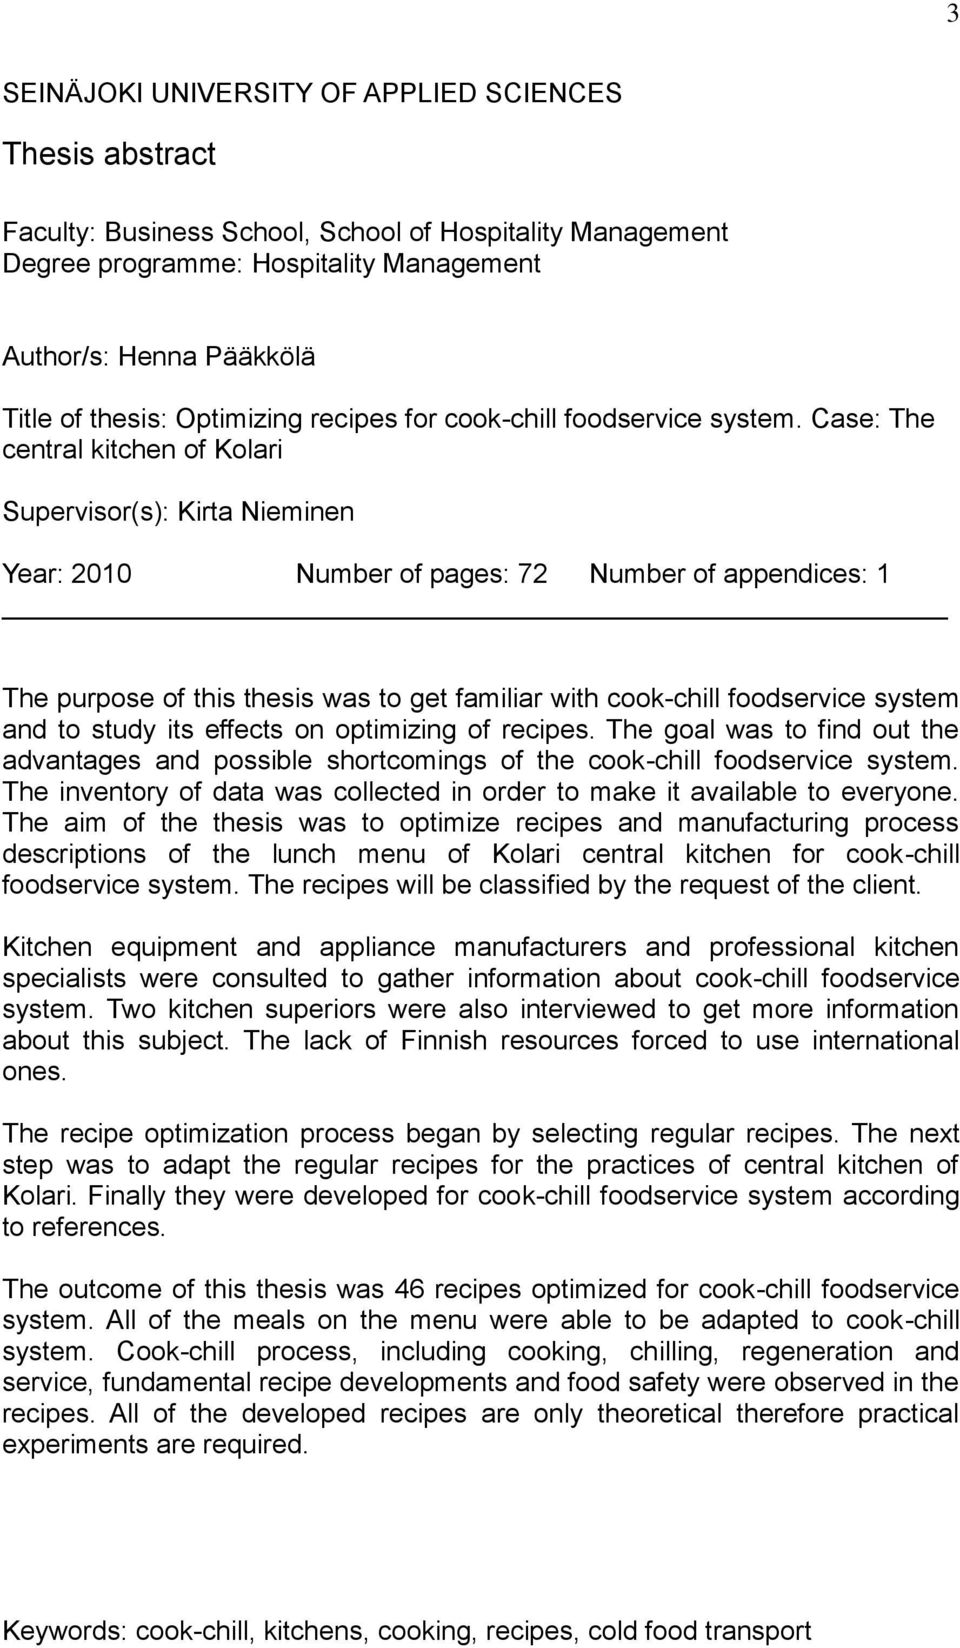 Case: The central kitchen of Kolari Supervisor(s): Kirta Nieminen Year: 2010 Number of pages: 72 Number of appendices: 1 The purpose of this thesis was to get familiar with cook-chill foodservice